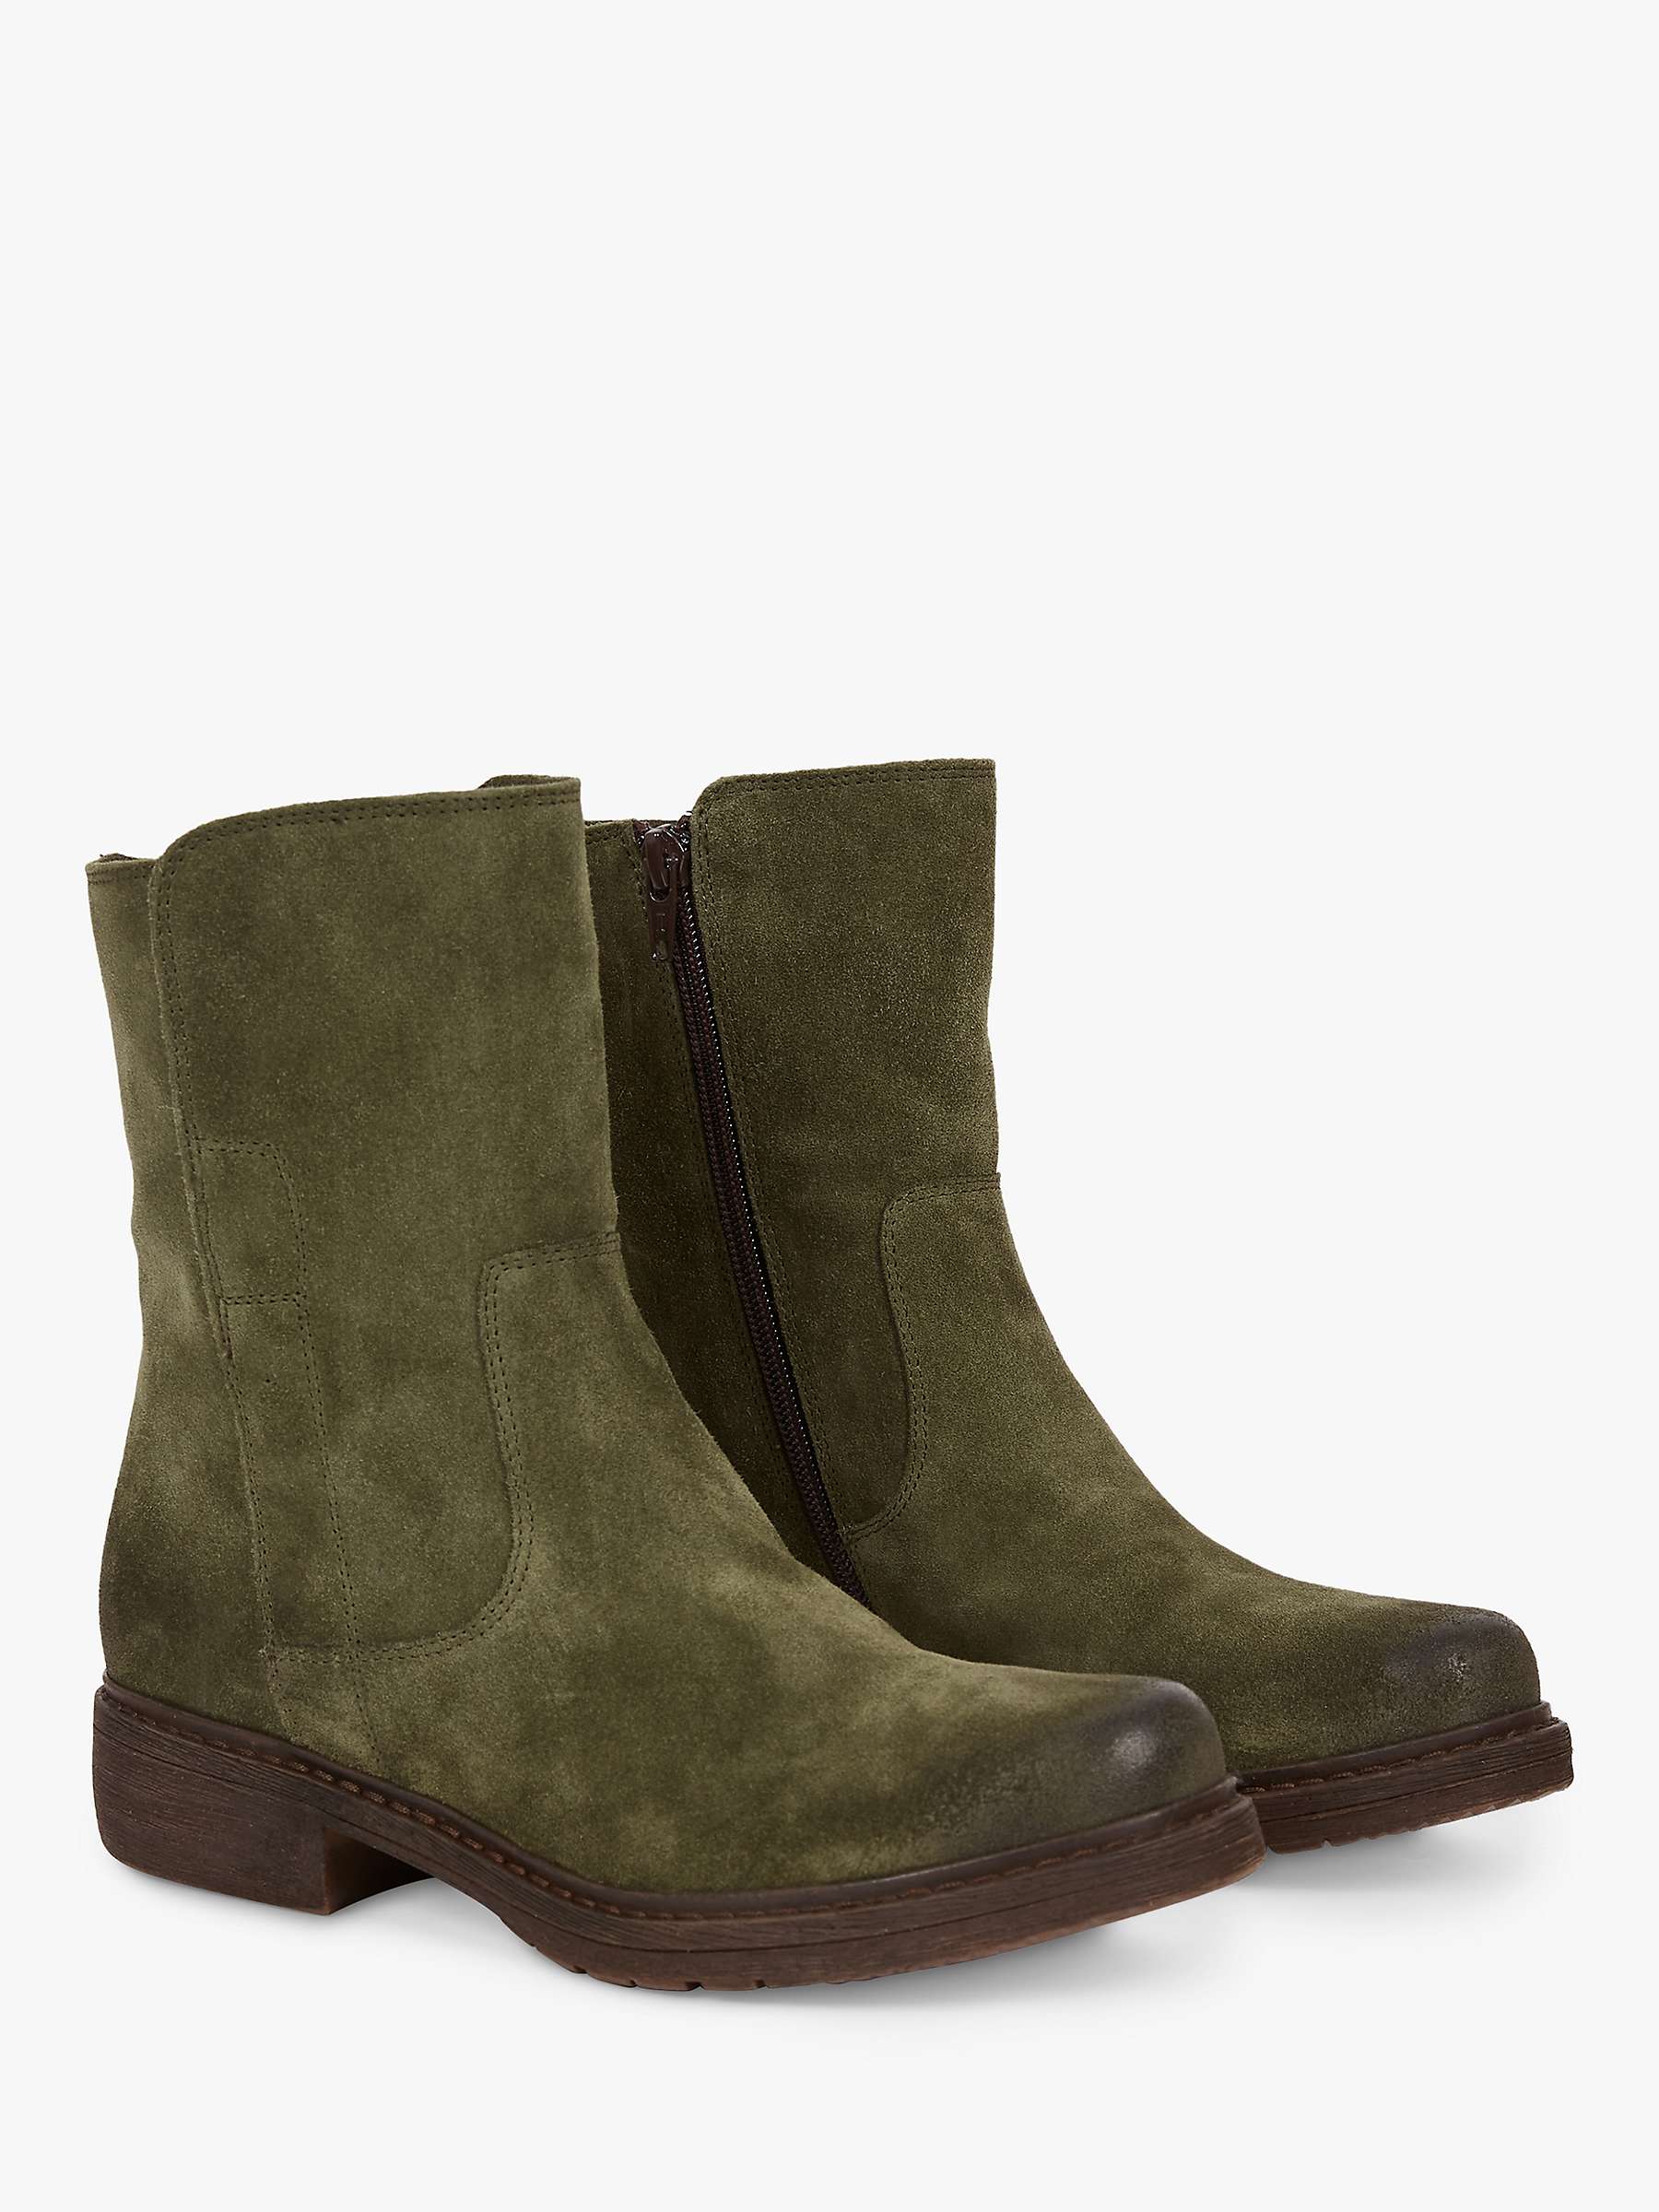 Buy Celtic & Co. Essential Leather Ankle Boots Online at johnlewis.com